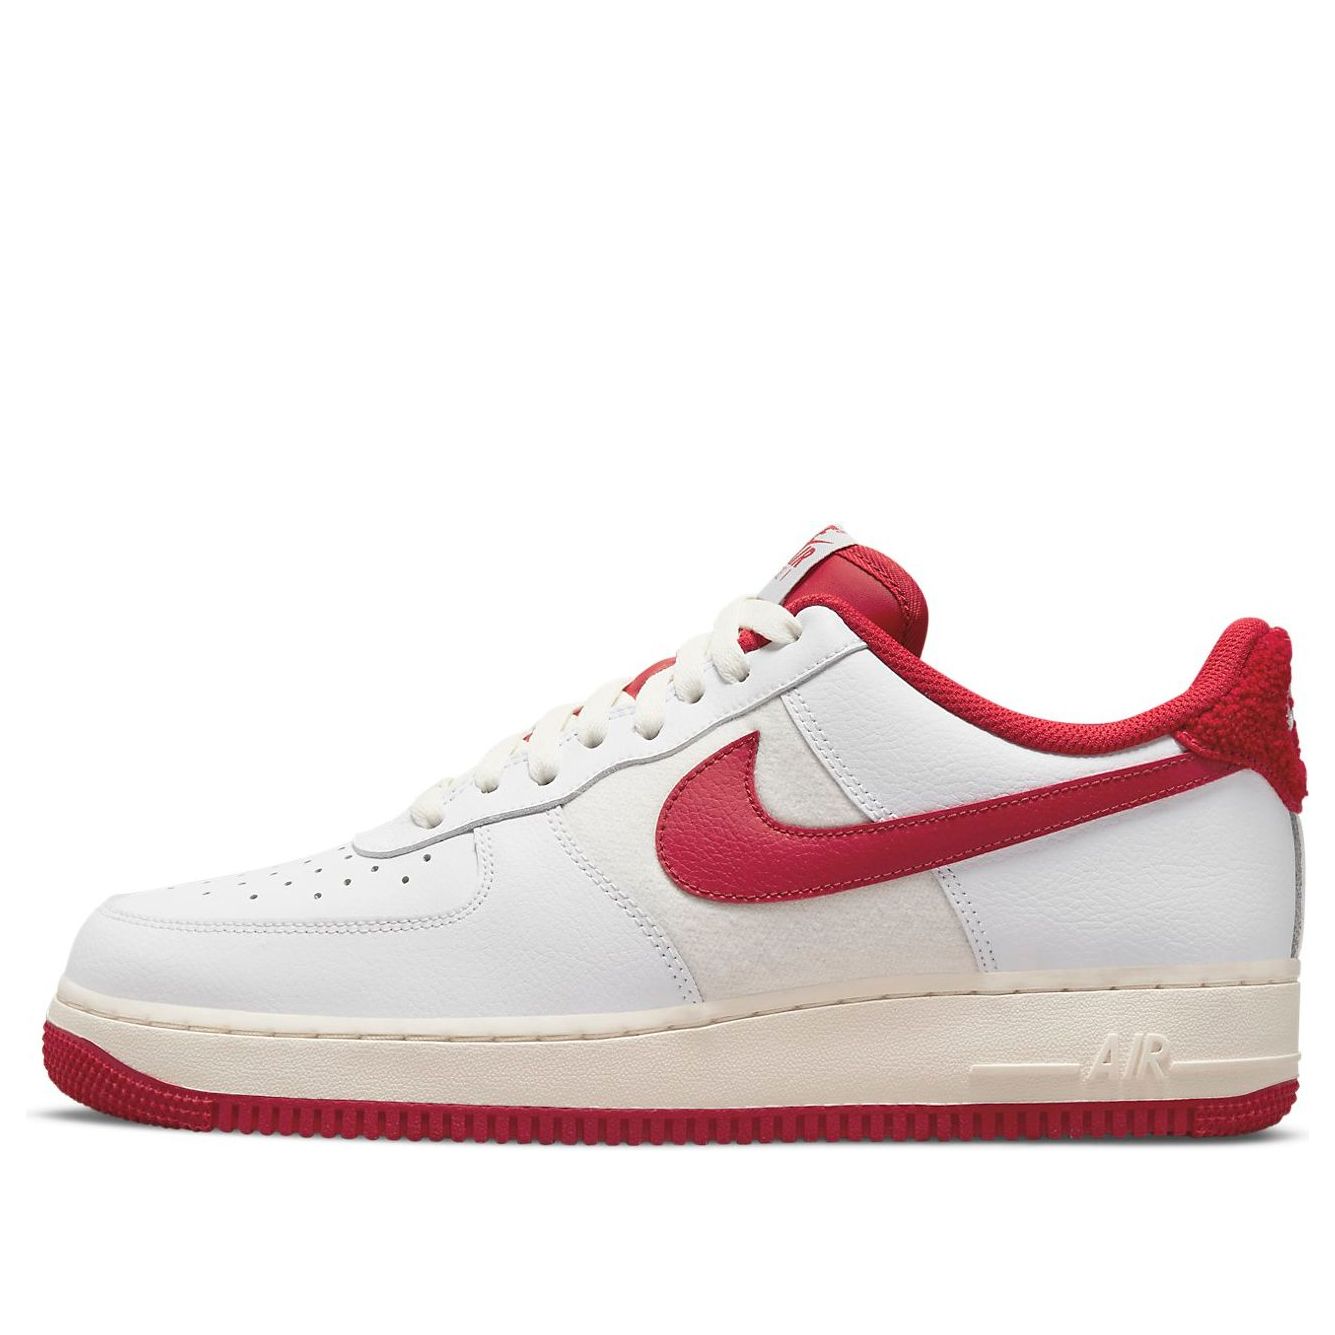 Nike Air Force 1 '07 LV8 'Letterman's Jacket' DO5220-161